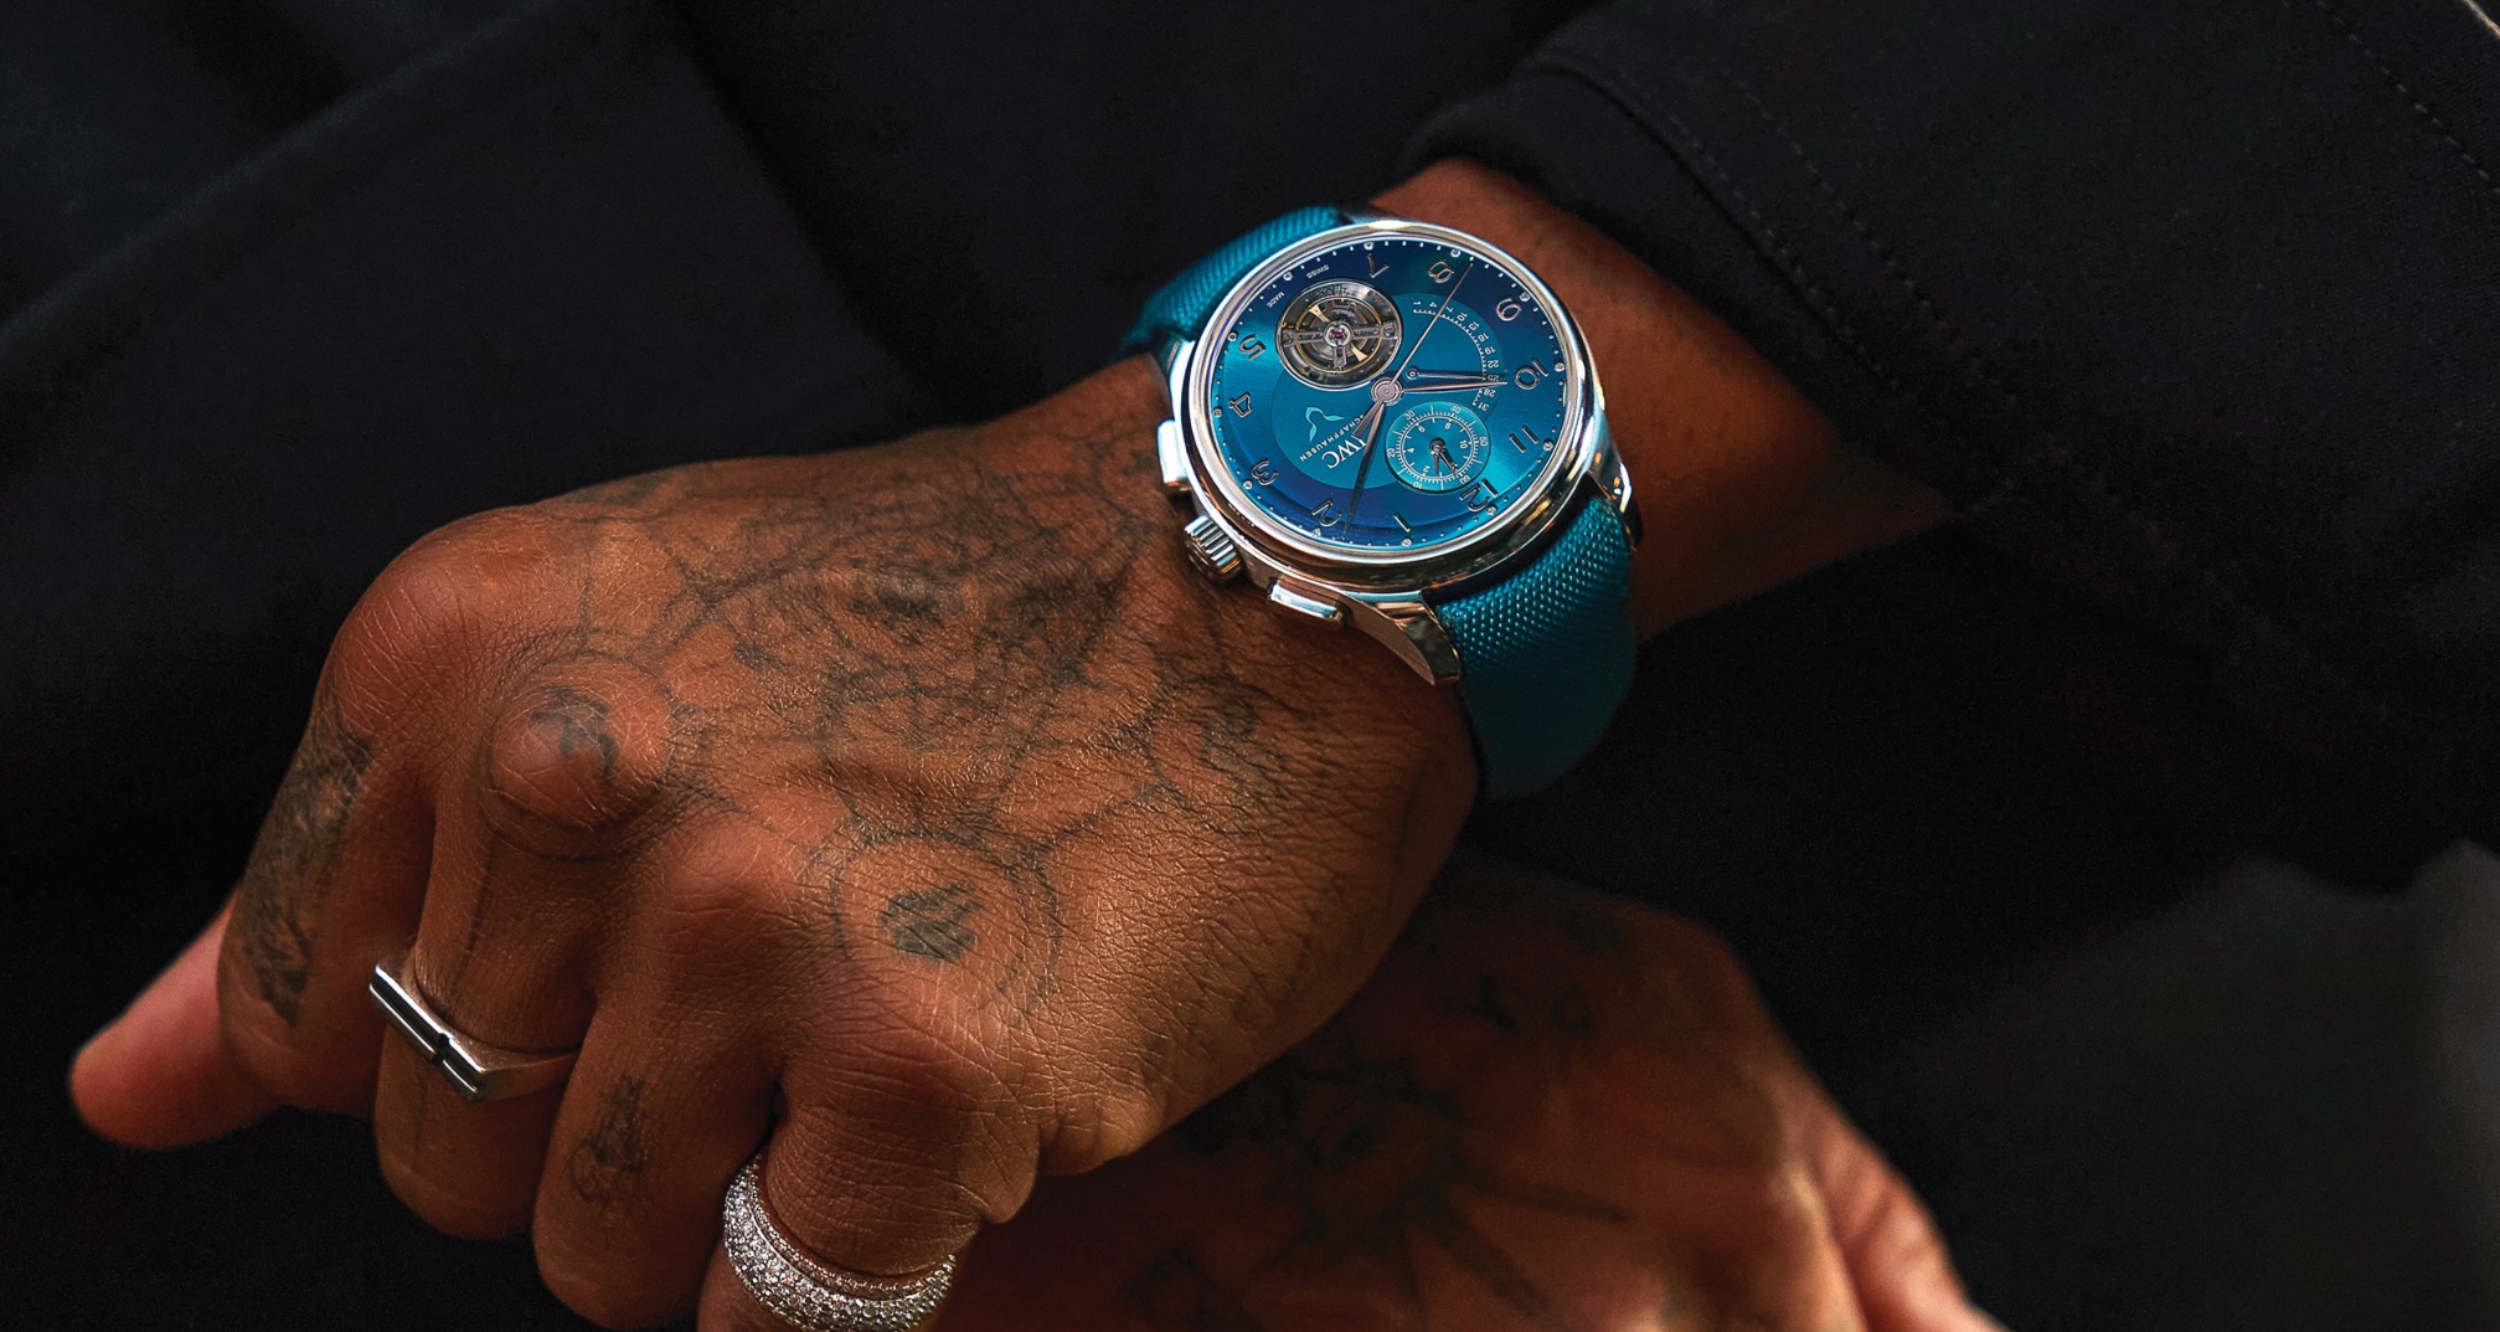 F1 GOAT Lewis Hamilton Teams With IWC For Winning Watch Collab